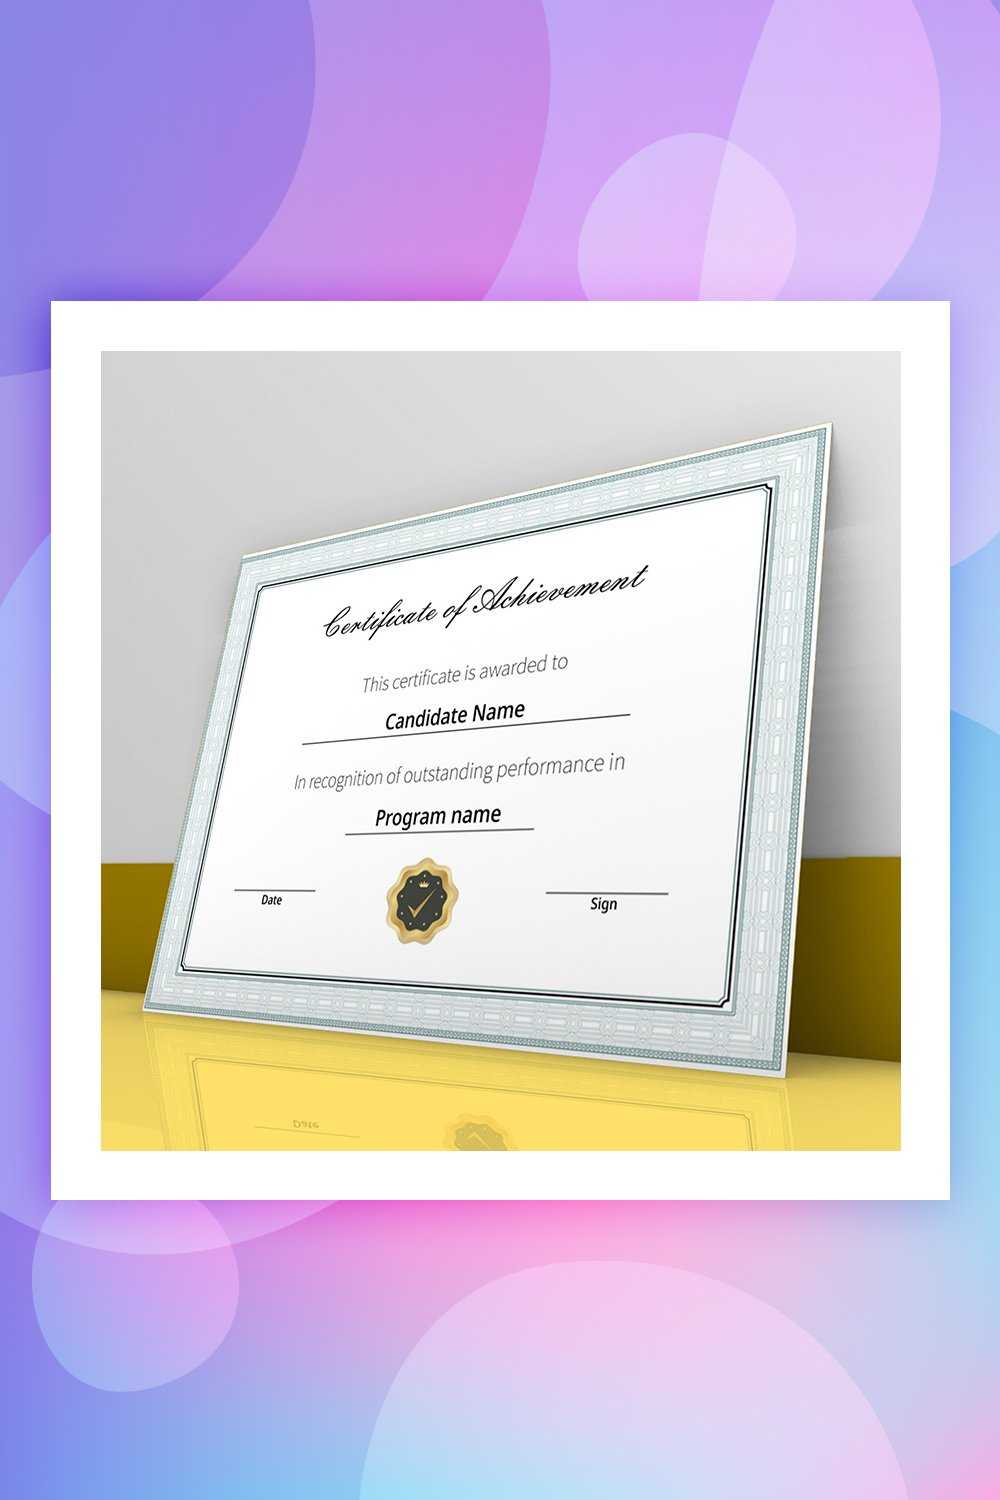 28 Attention Grabbing Certificate Templates - Colorlib Within No Certificate Templates Could Be Found